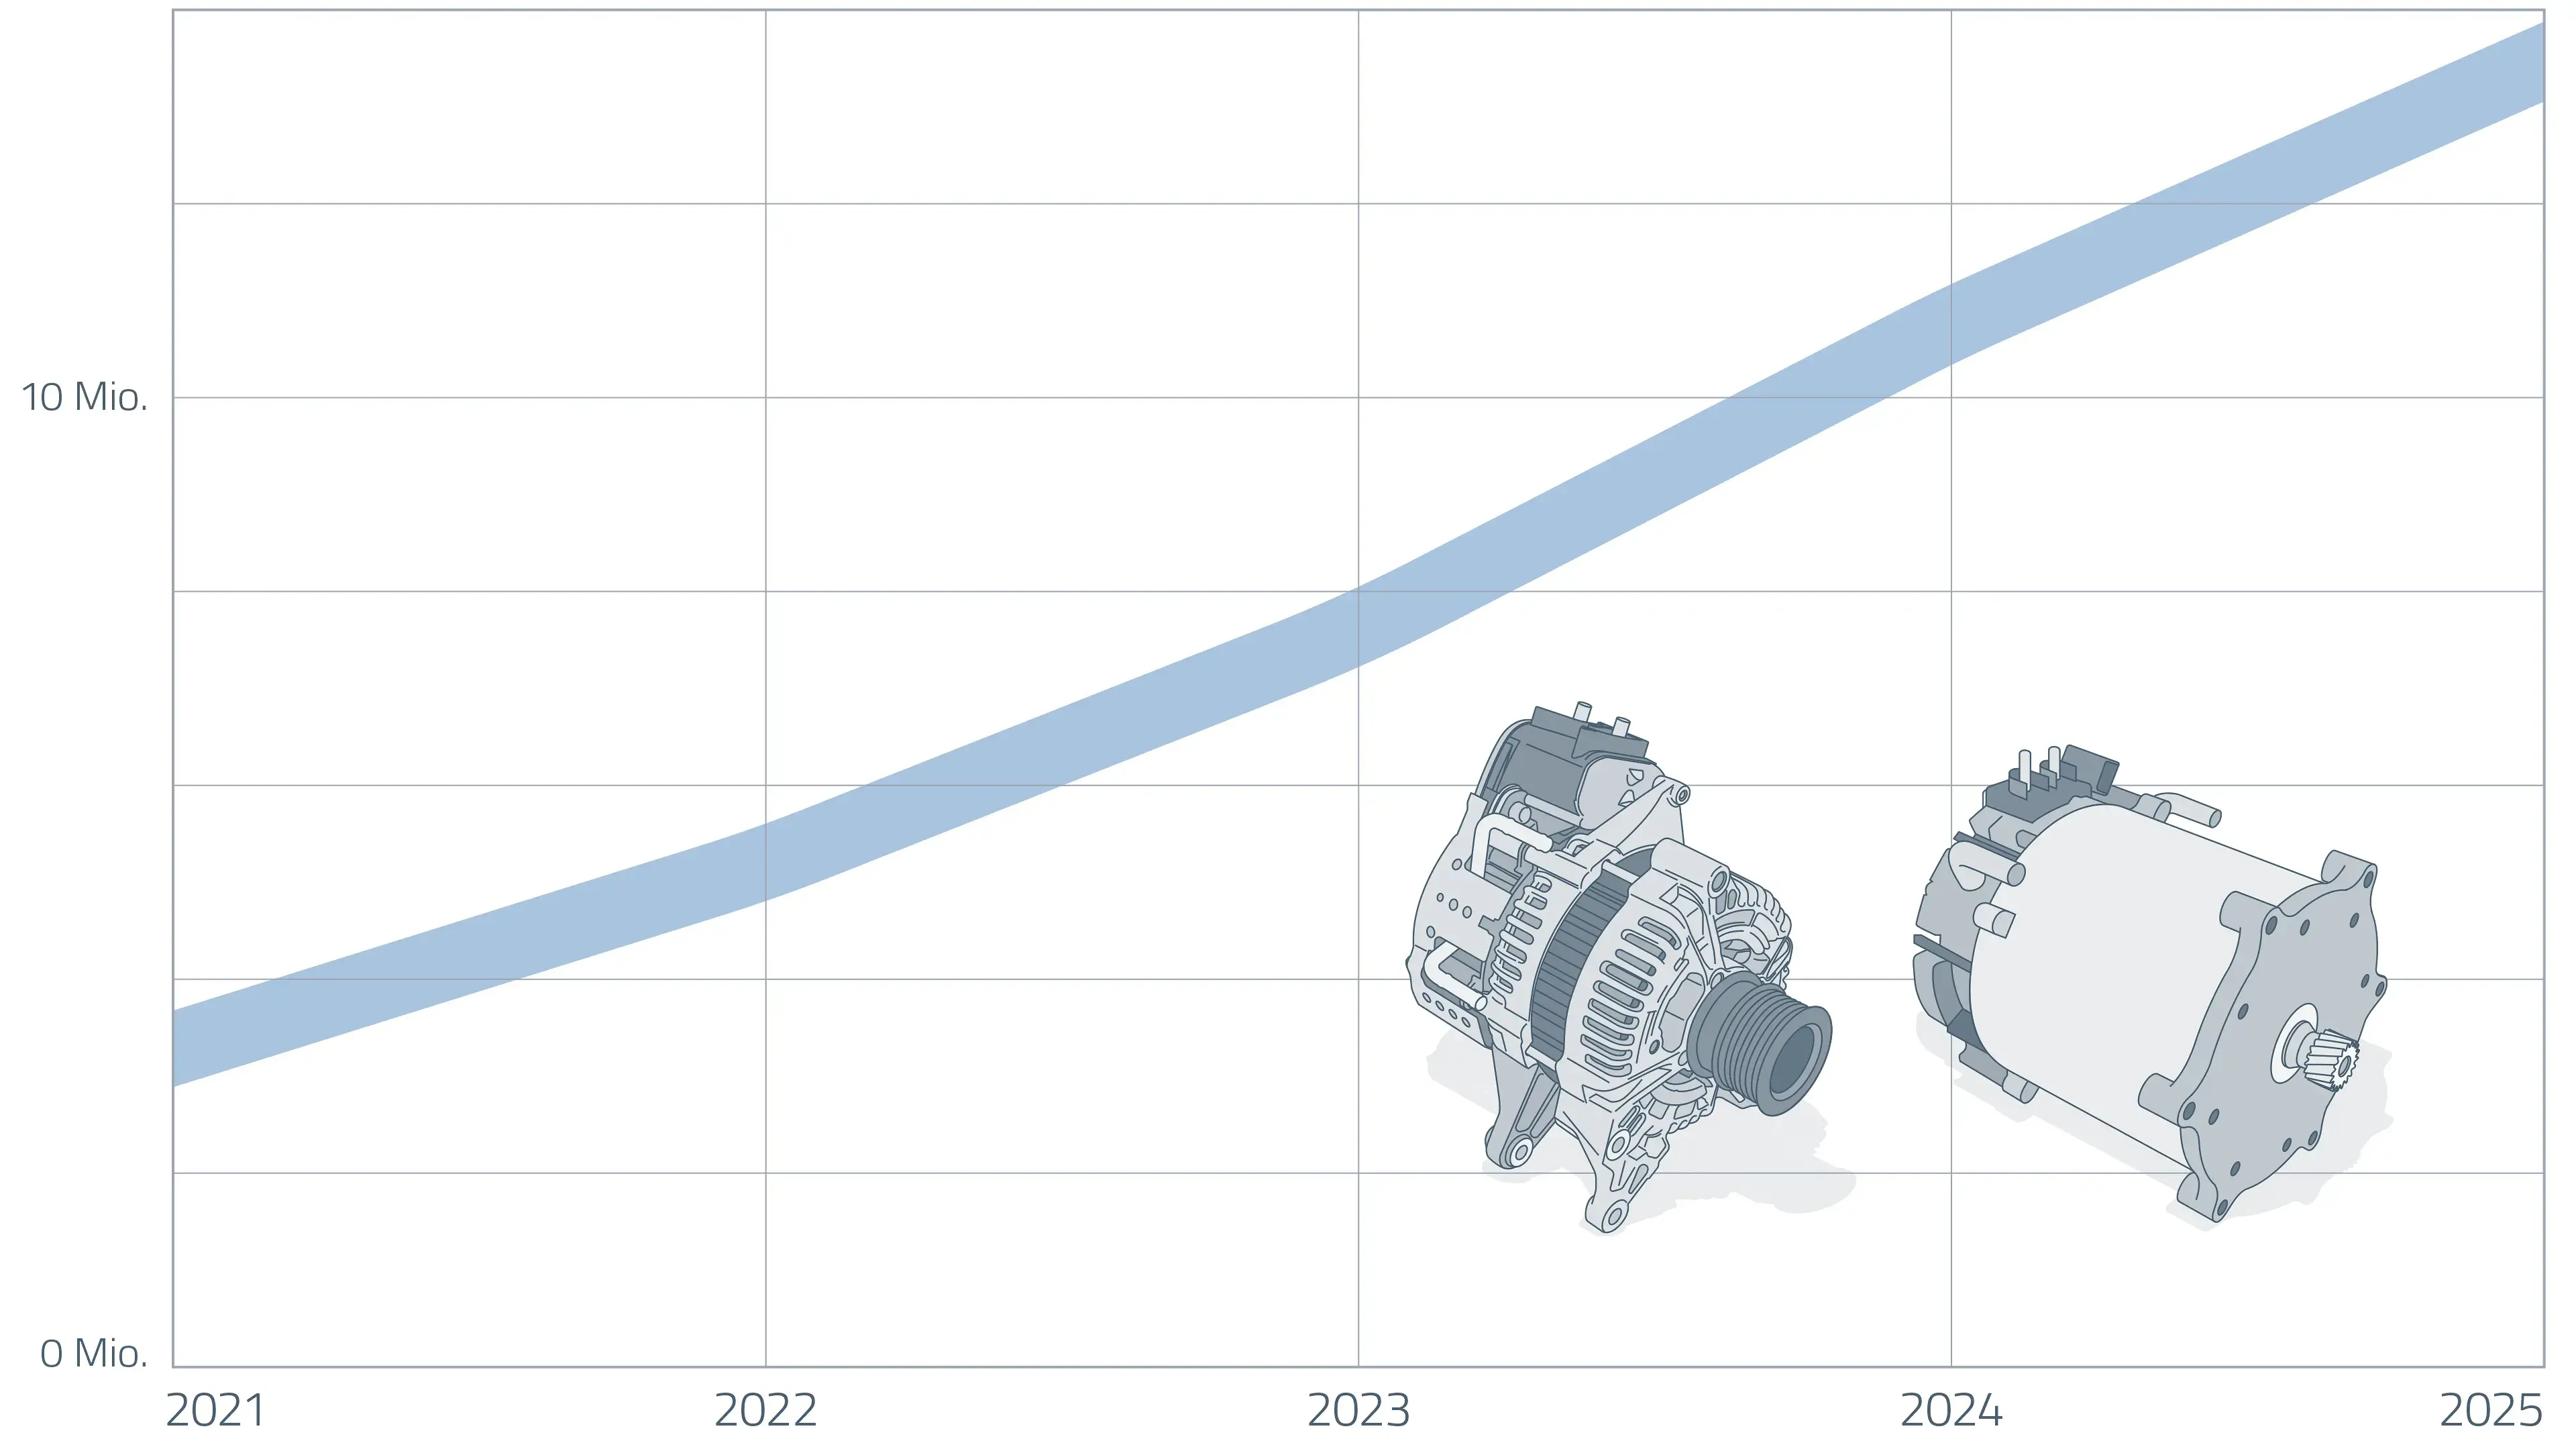 Graphic: Growth forecast vehicles with 48V/Mild hybrid drive technology 